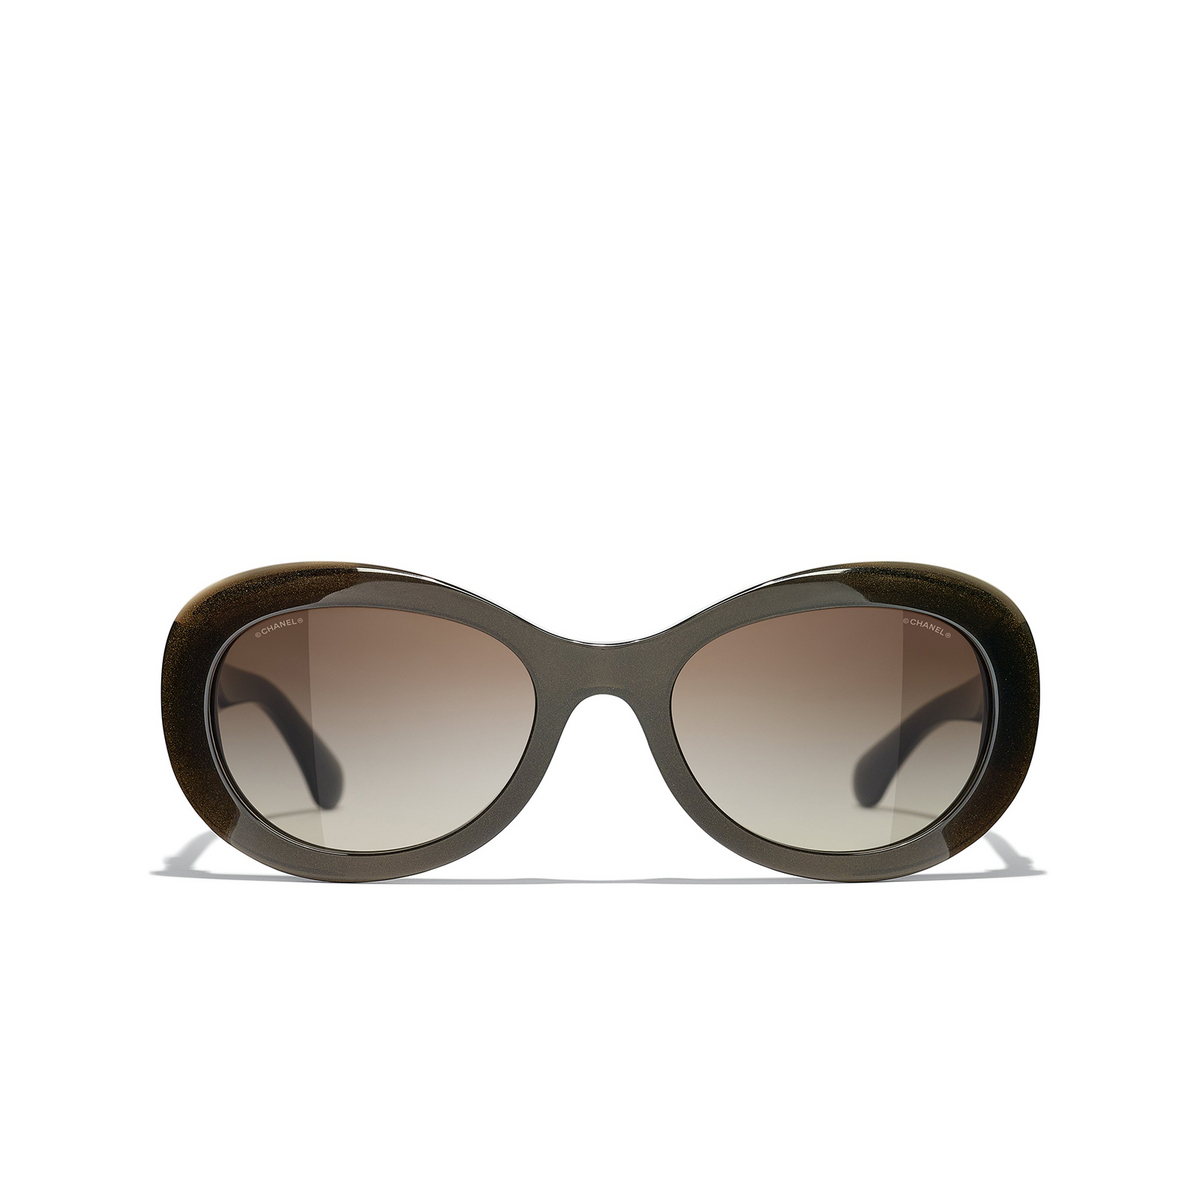 CHANEL oval Sunglasses 1706S5 Brown - front view